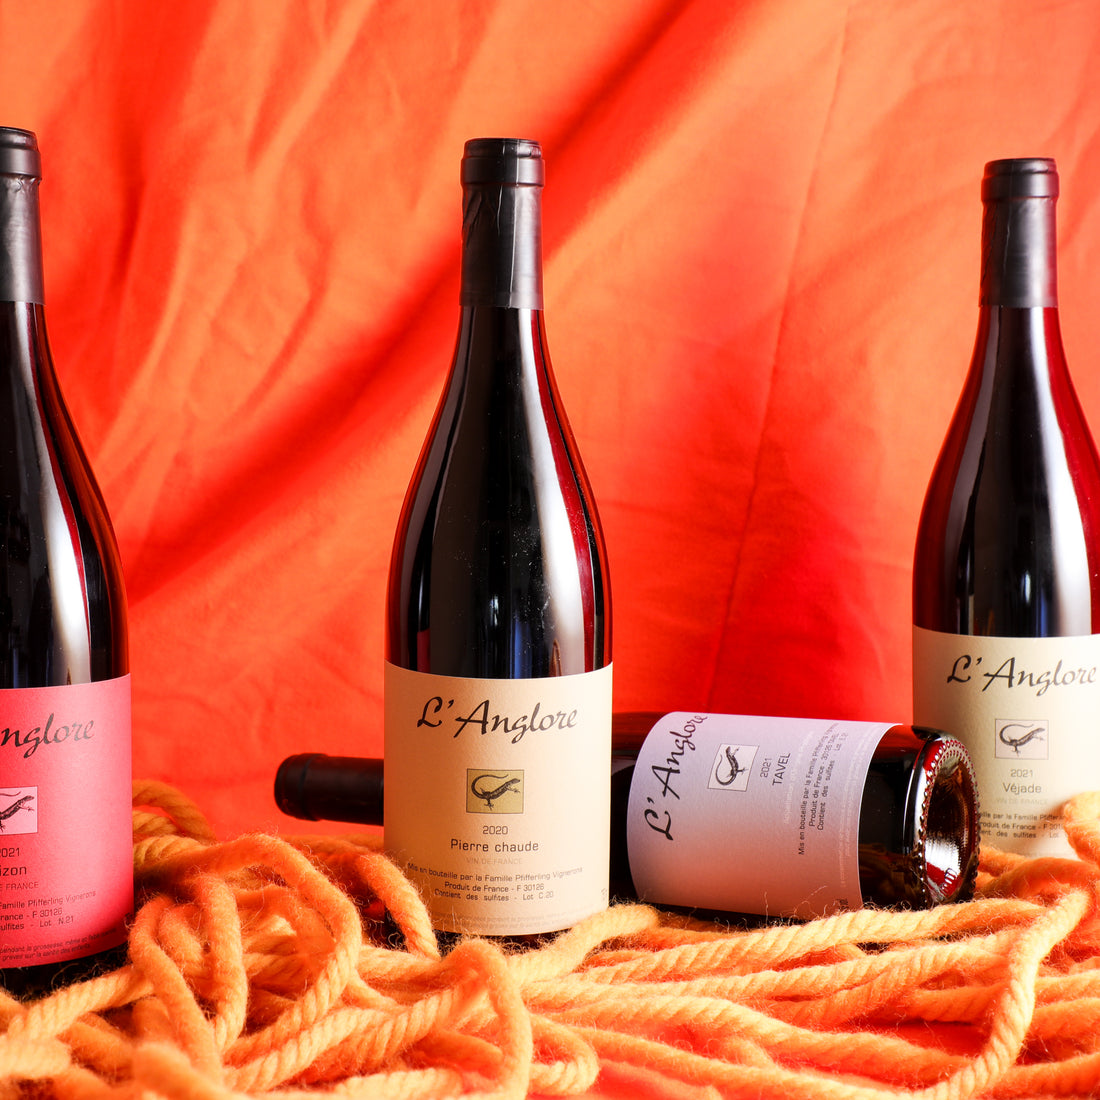 L'anglore , the wines that redefined rose and chilled red